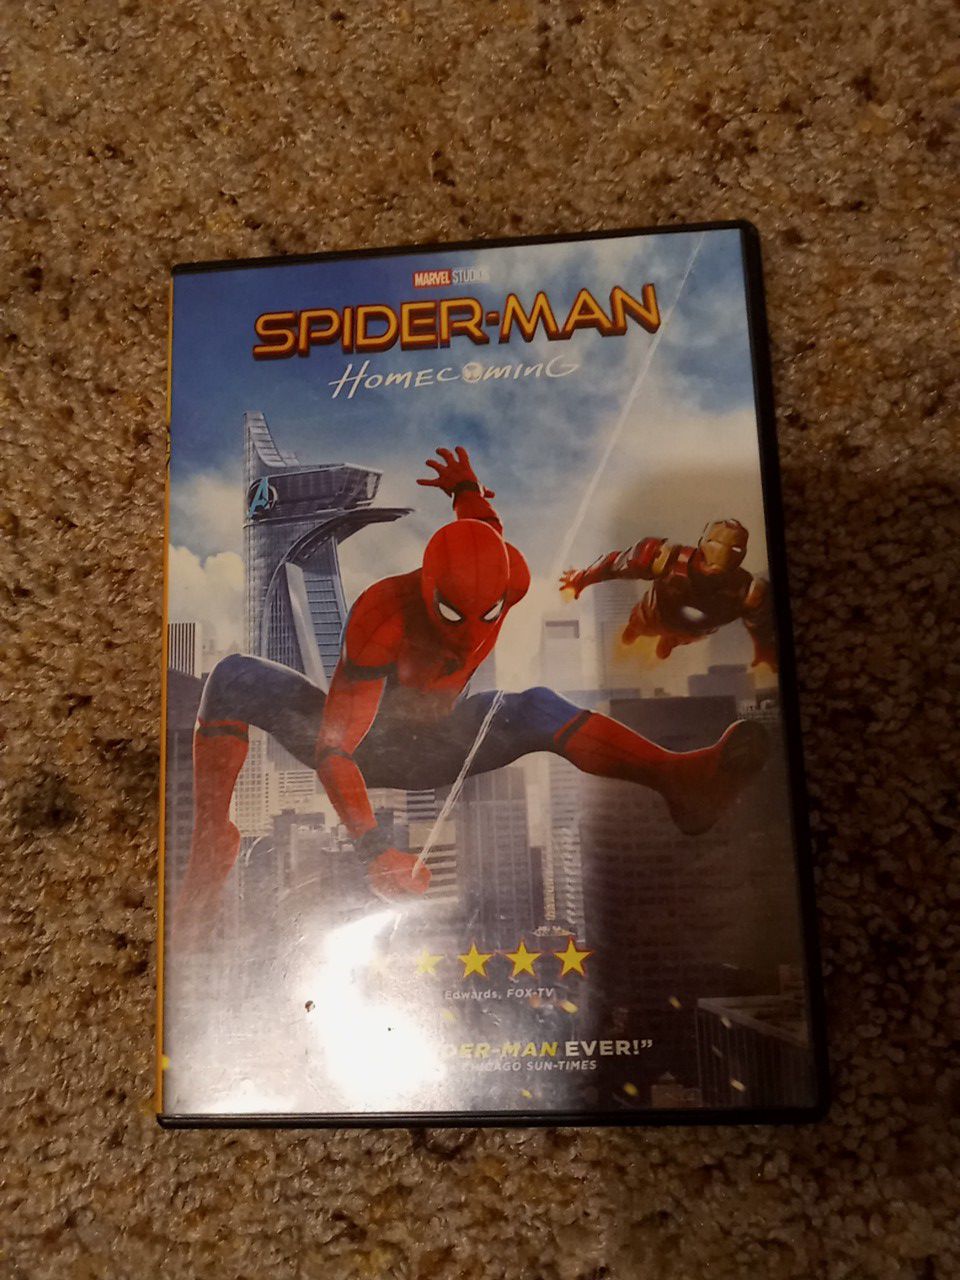 Spiderman home coming